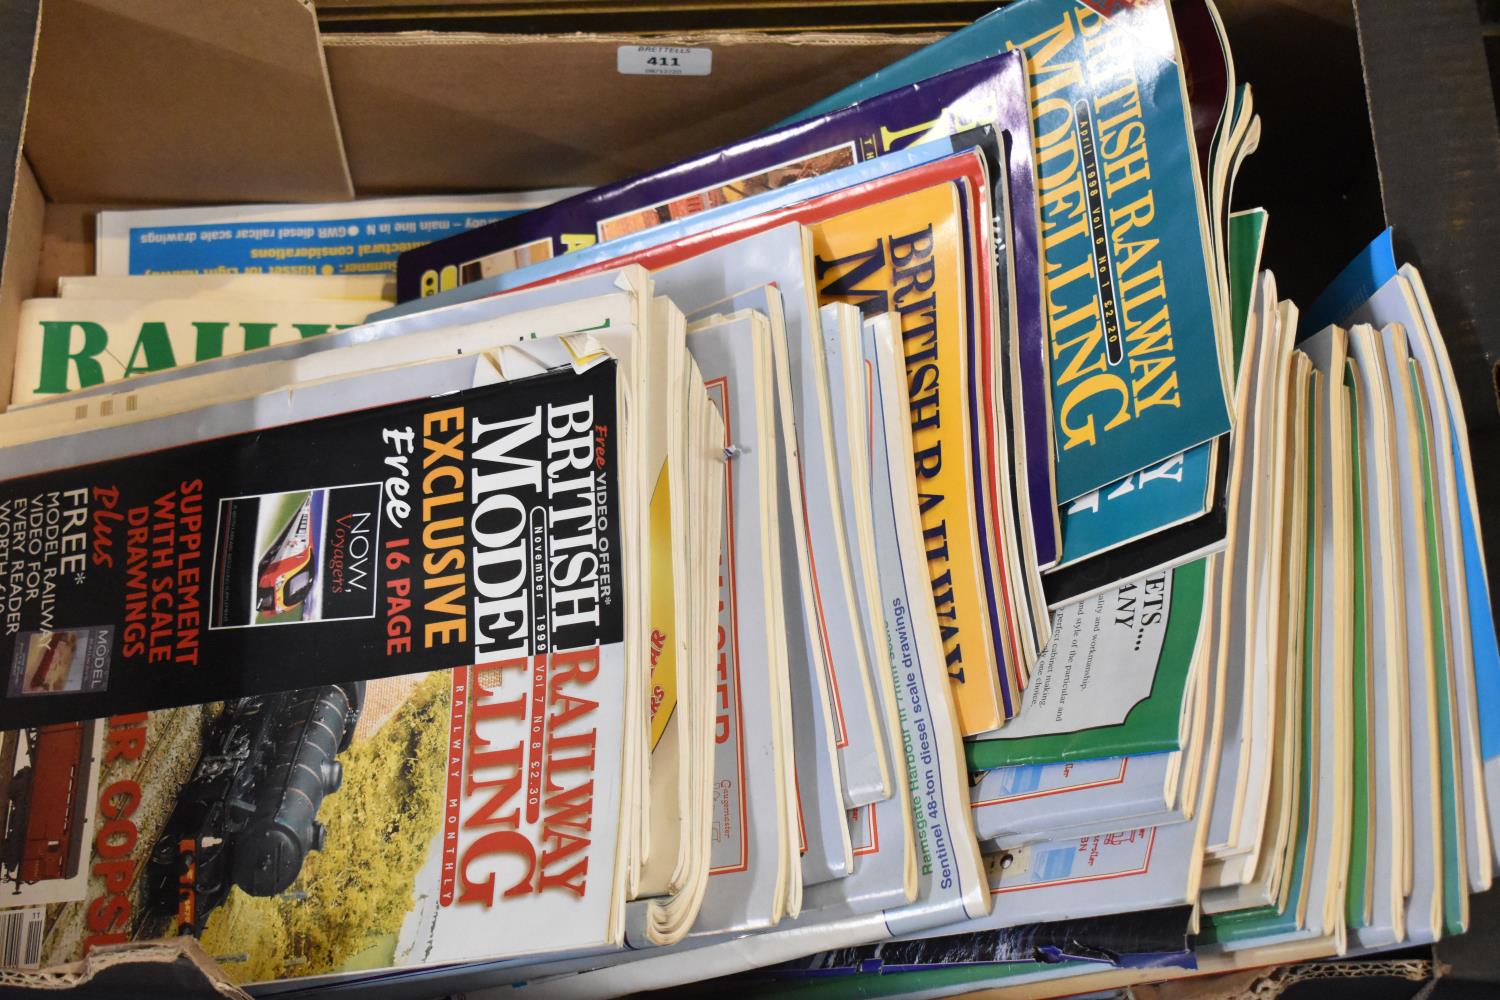 A Collection of Railway Modelling Magazines